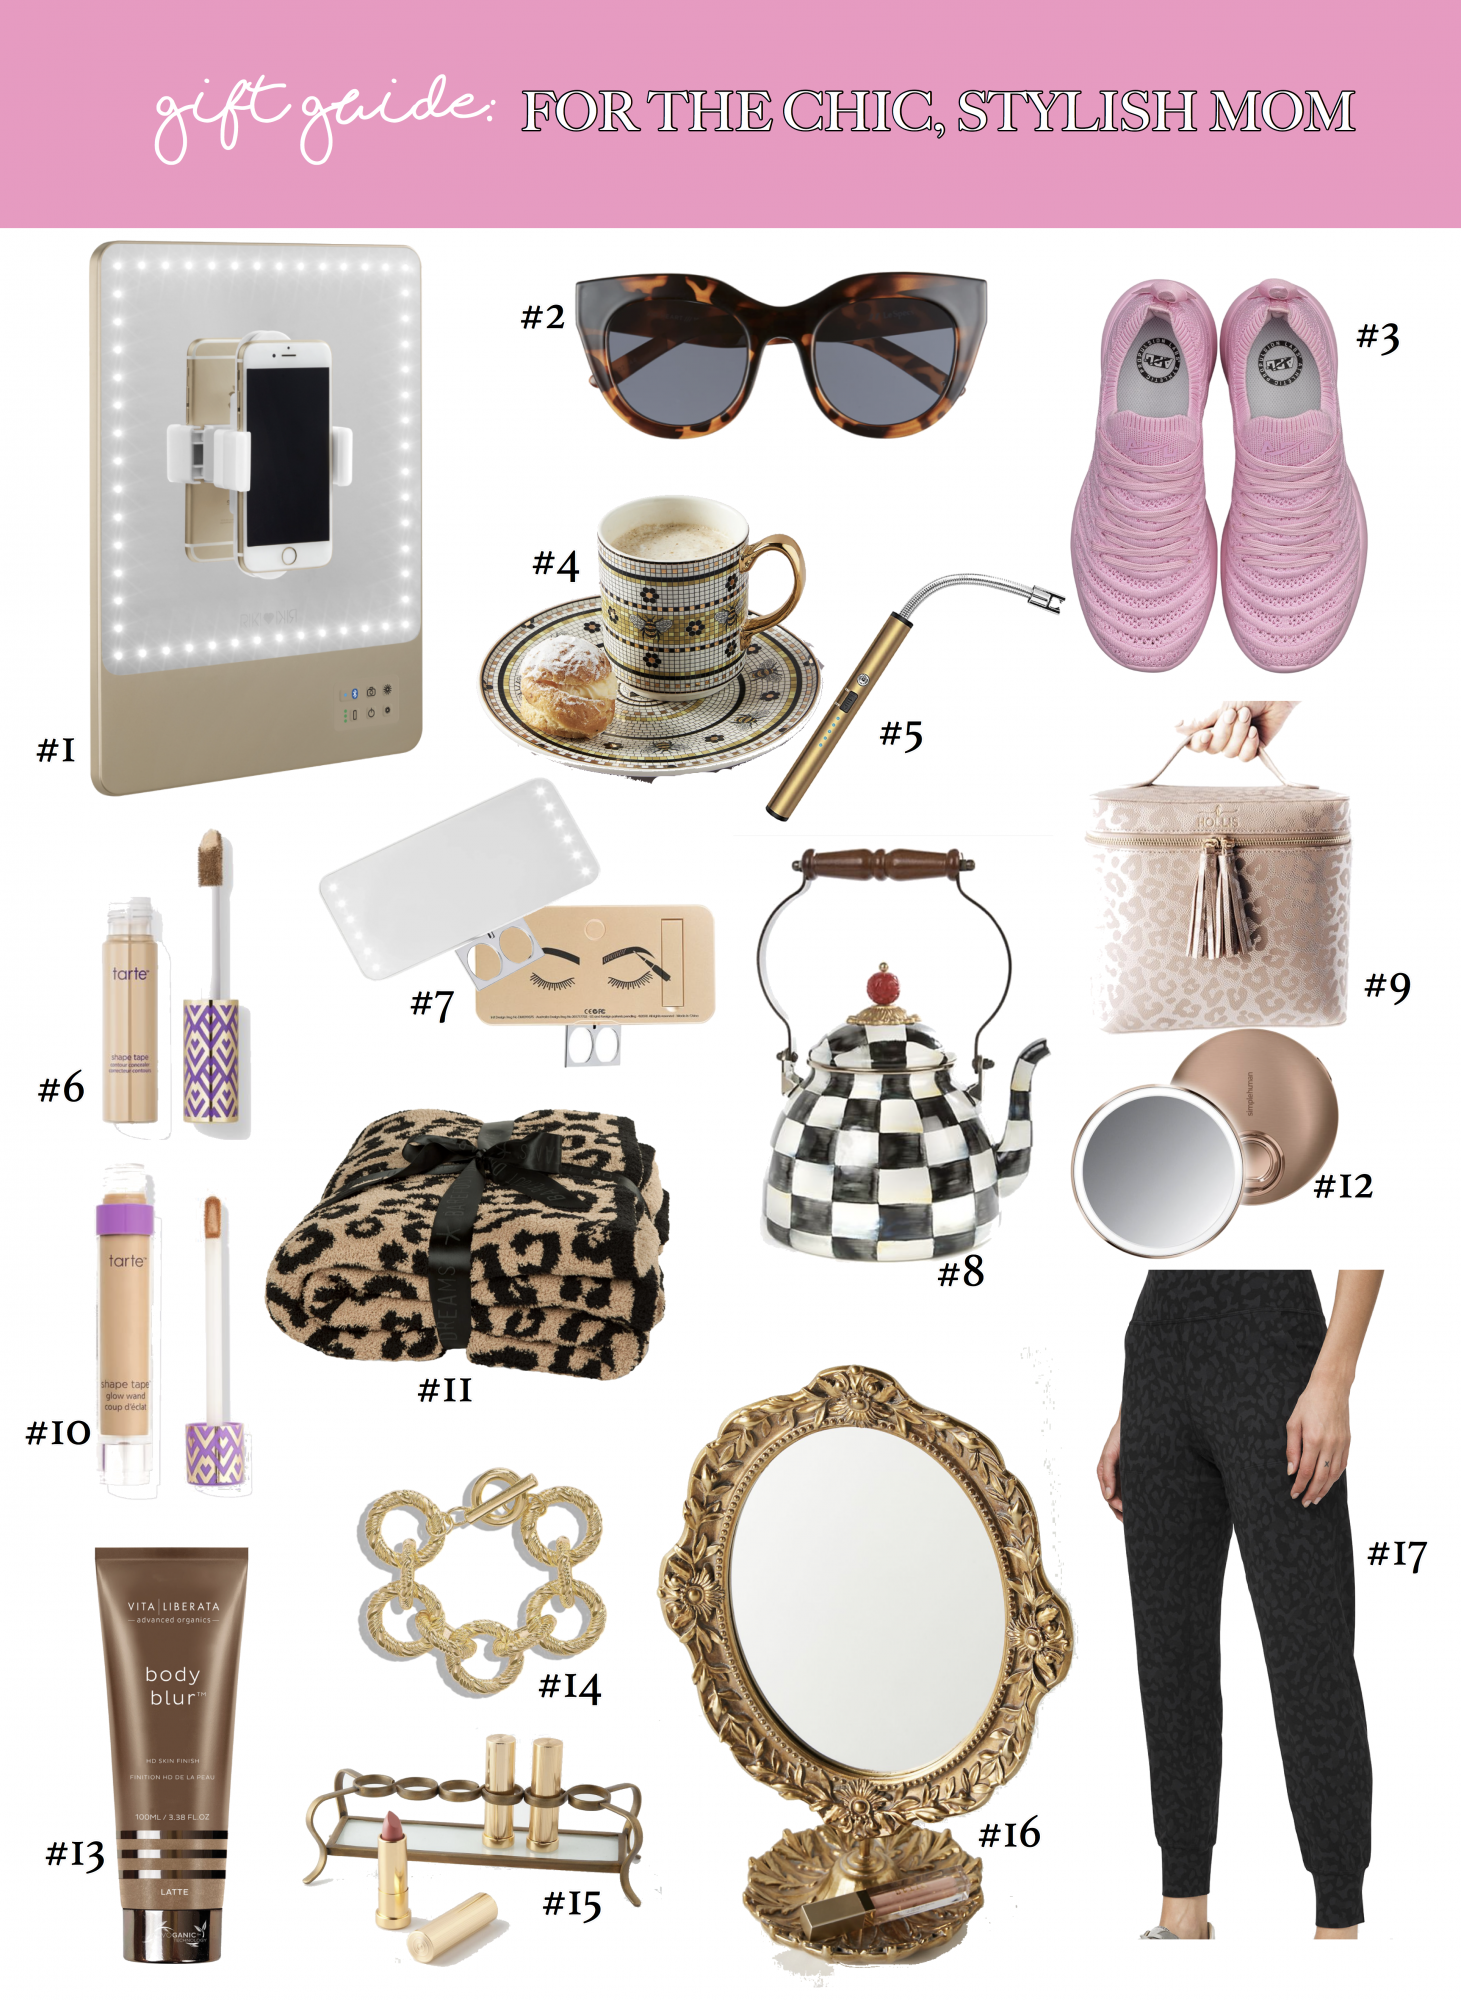 MOTHERS DAY GIFT GUIDE 2020, EMILY GEMMA | Stylish Mother's Day Gift Ideas by popular US life and style blog, The Sweetest Thing: collage image of a RIKI Skinny, Air Heart Sunglasses, APL Tennis Shoes, Garden Tile Mug, Re-Chargable Lighter, Tarte Shape Tape Concealer, RIKI Cutie, MacKenzie Childs Tea Kettle, Hollis Leopard Makeup Bag, Tarte Shape Tape Glow Wand, Barefoot Dreams Throw Blanket, Sensor Makeup Mirror Compact, Vita Liberata Body Blur, Parisian Links Bracelet, Lipstick Holder, Parisian Mirror Vanity, and Lululemon Leopard Joggers. 